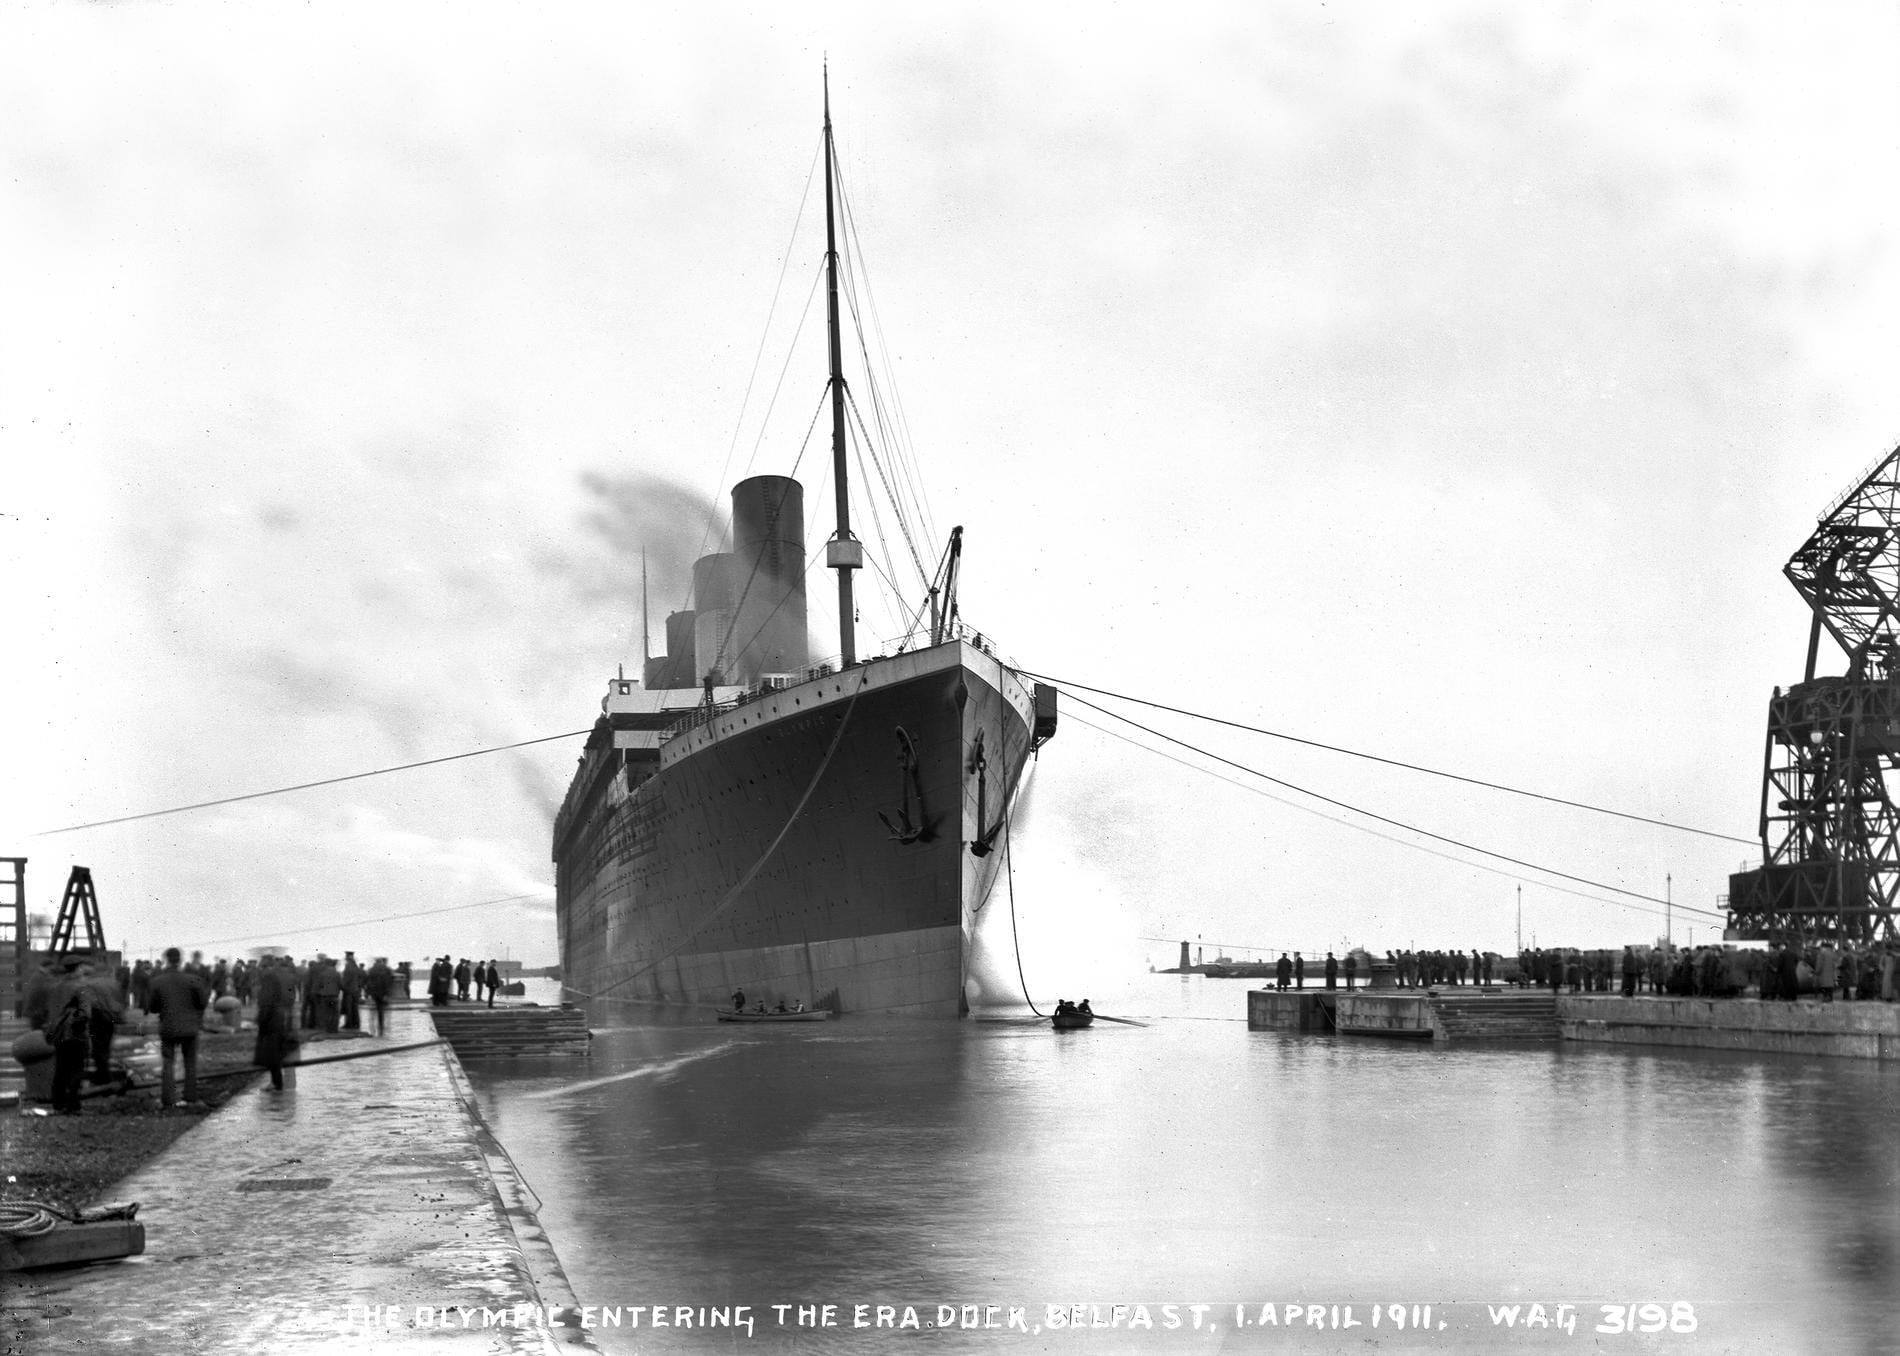 RMS Olympic - On this day 87 years ago, on 15 may 1934, RMS Olympic rammed  and sank Nantucket Lightship LV-117. On the approach to New York, RMS  Olympic, inbound in heavy